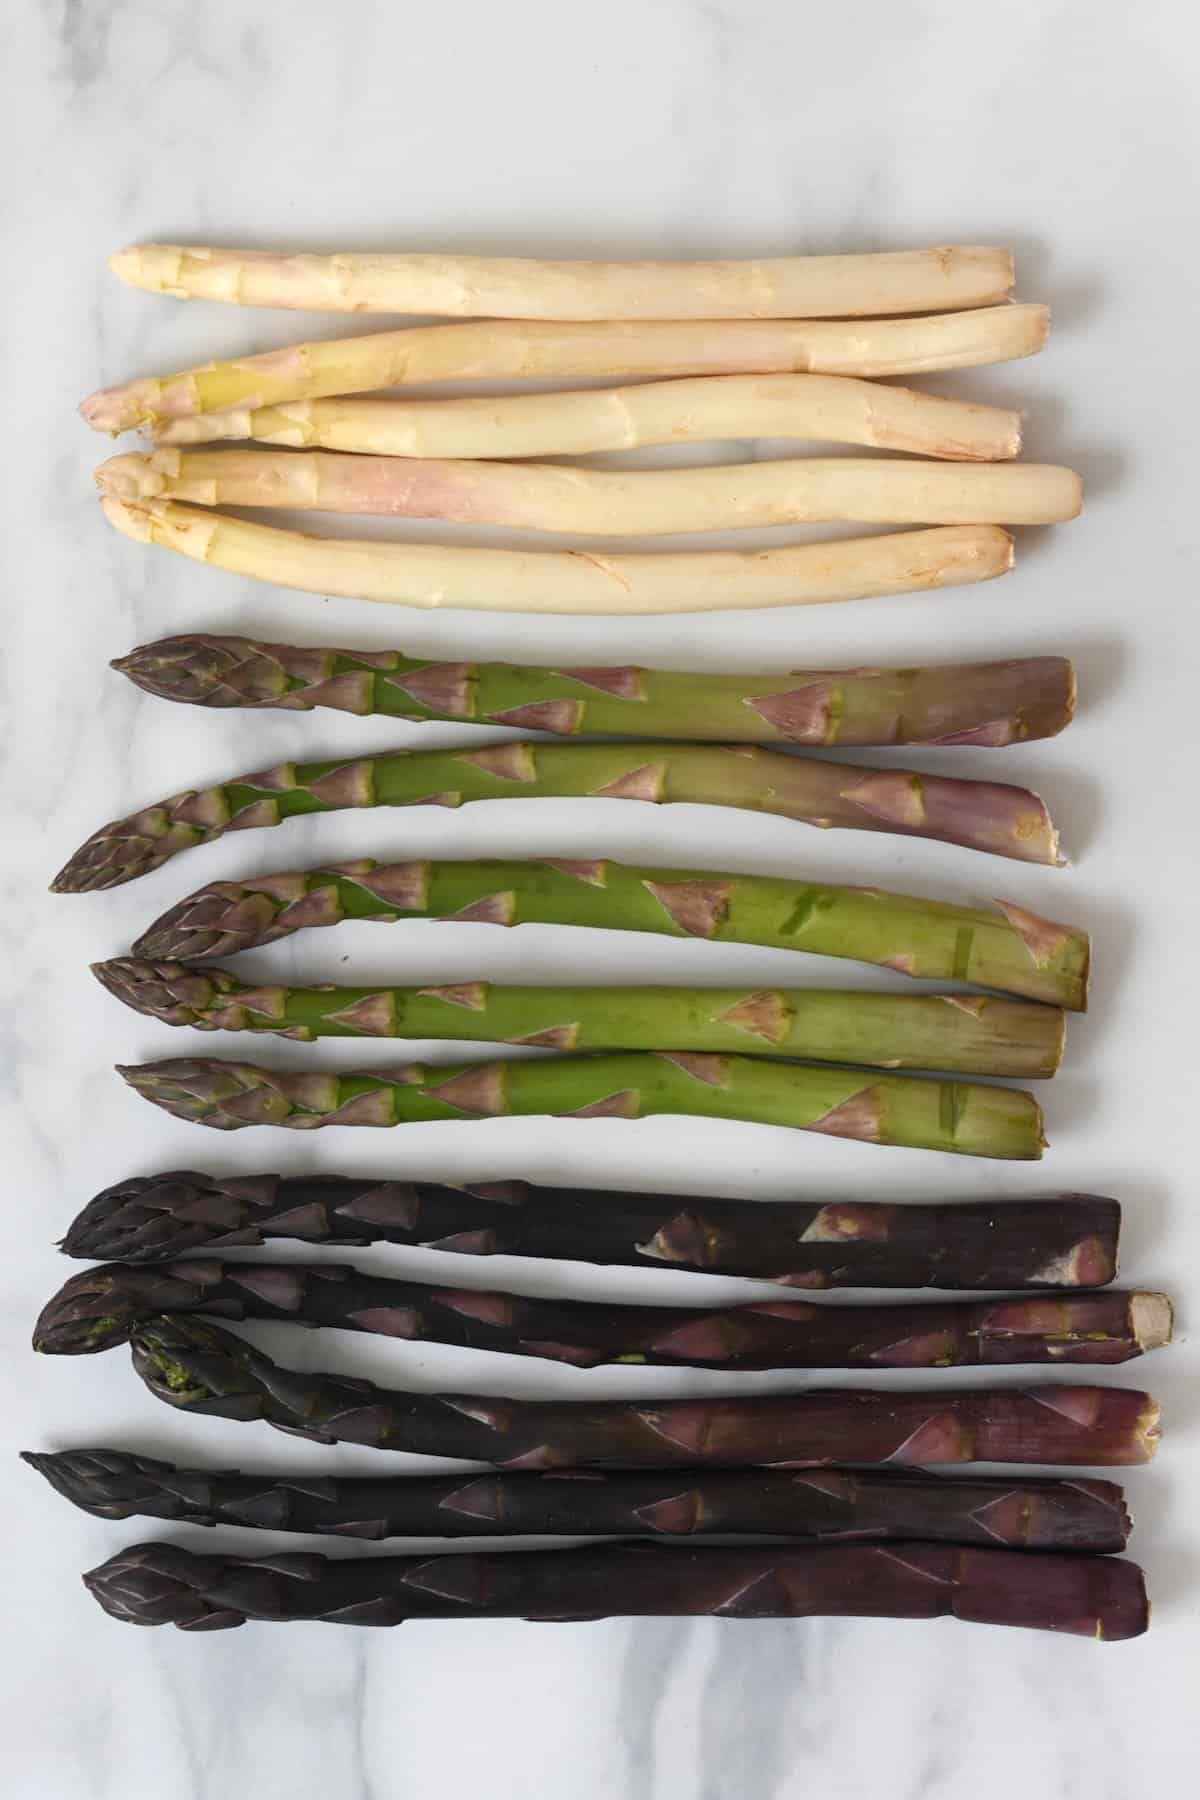 White, green and purple asparagus on a flat surface